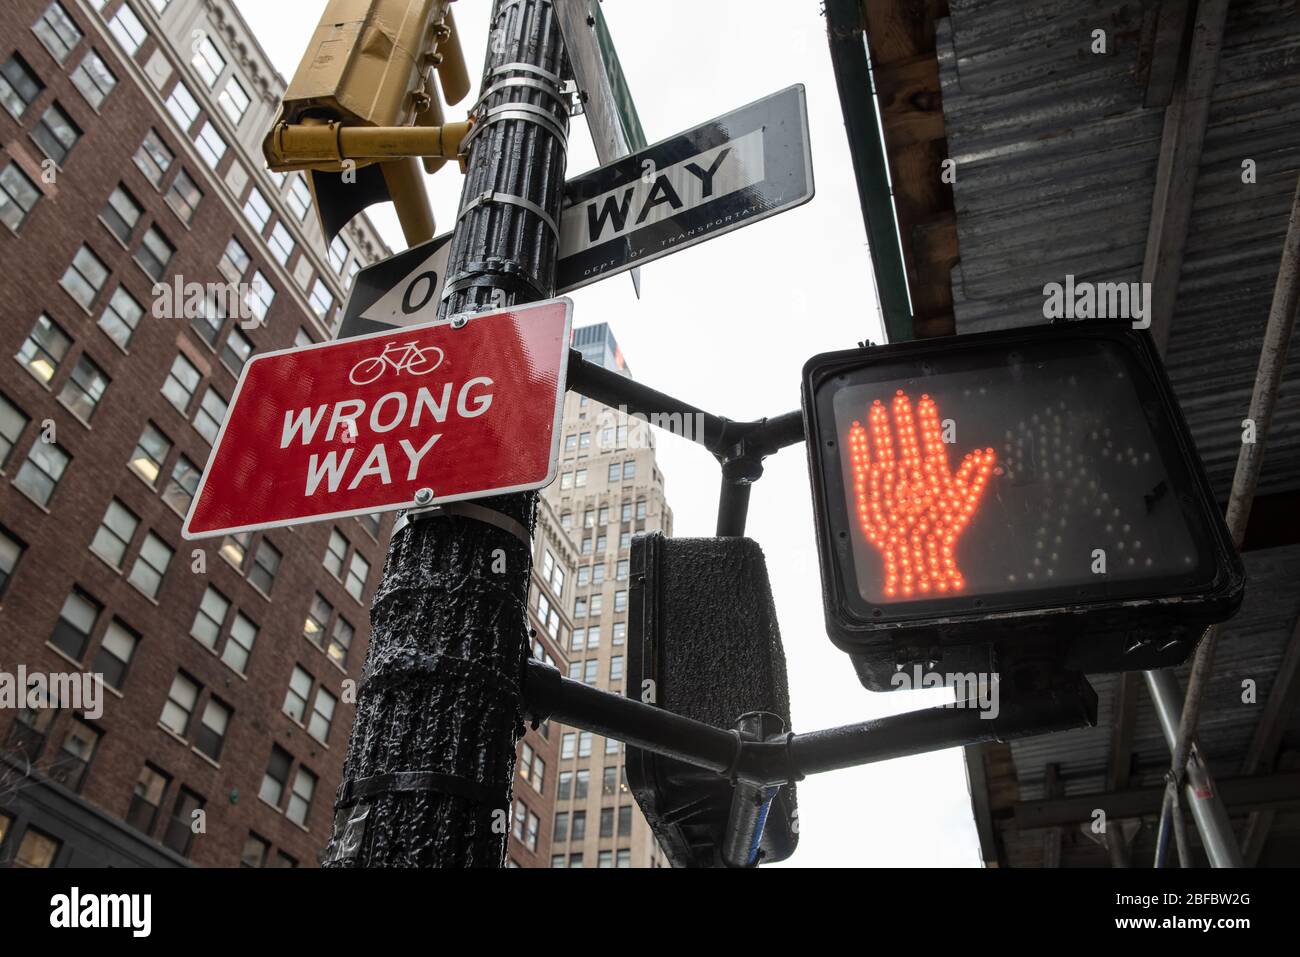 Street signs with Wrong Way, Bicycle Route, One Way and a red stop sign hand in an urban area. Stock Photo